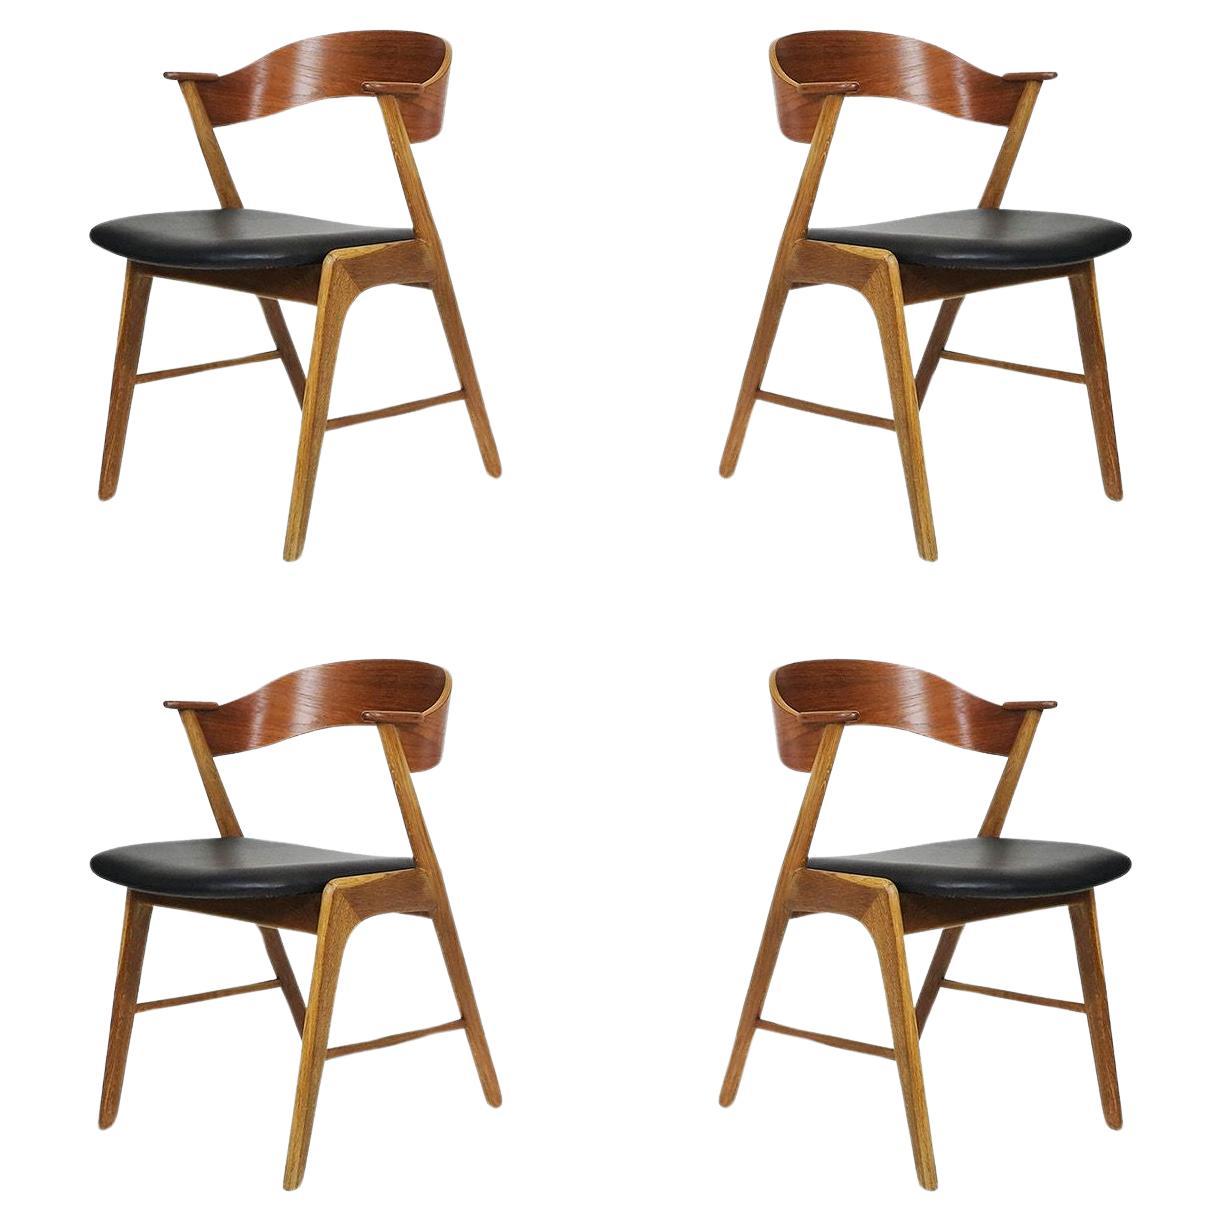 Kai Kristiansen Oak and Teak Curved Back Dining Chairs